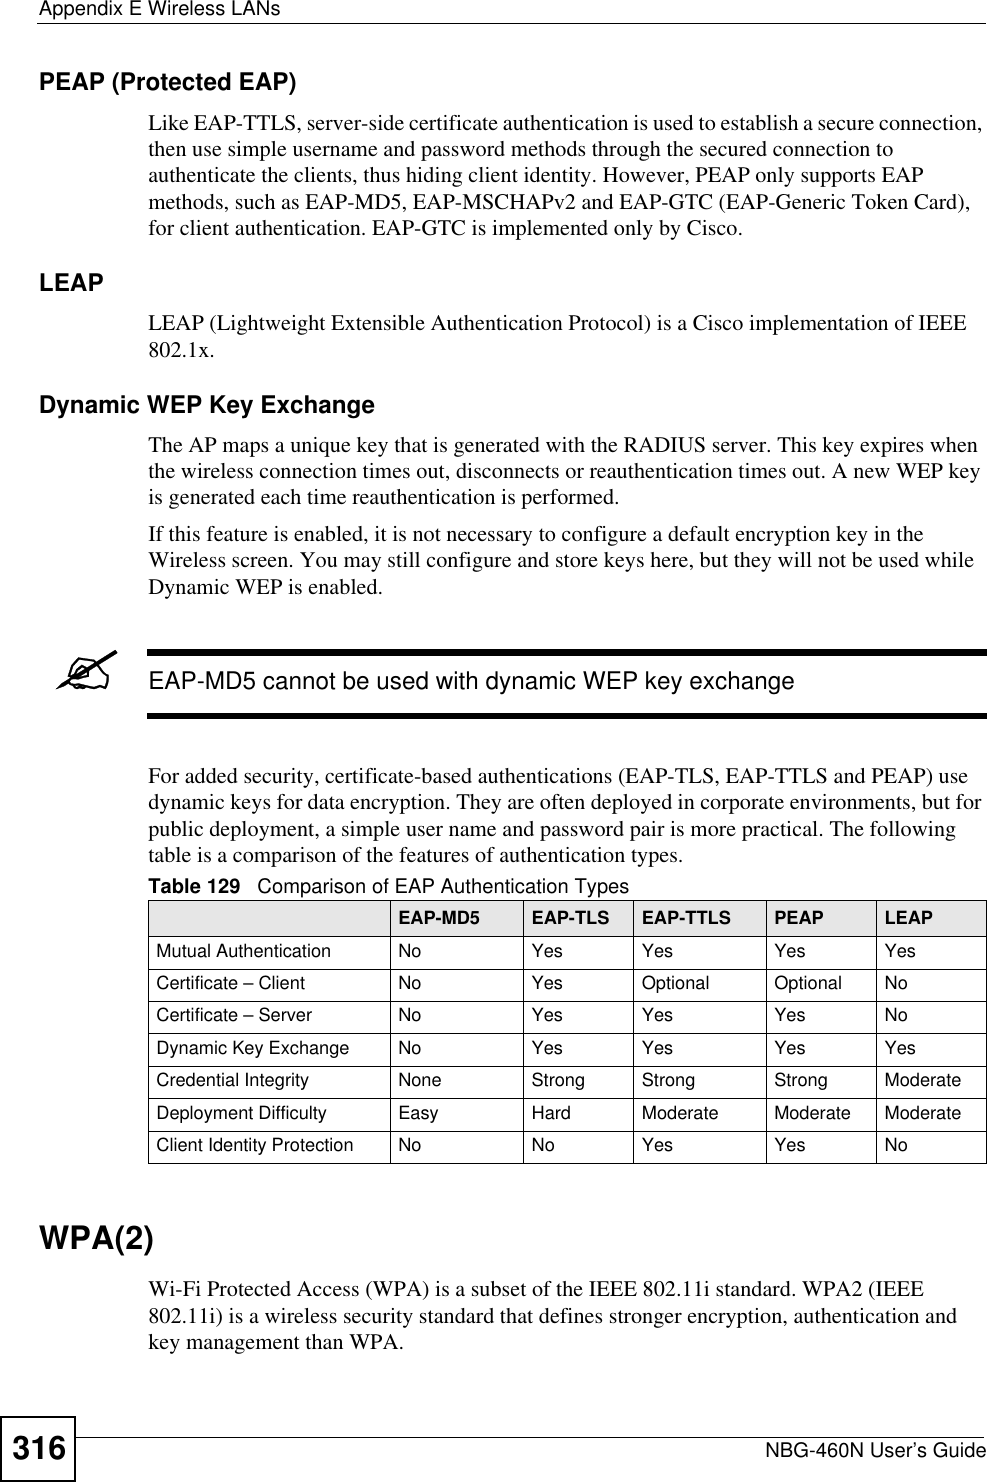 Appendix E Wireless LANsNBG-460N User’s Guide316PEAP (Protected EAP)Like EAP-TTLS, server-side certificate authentication is used to establish a secure connection, then use simple username and password methods through the secured connection to authenticate the clients, thus hiding client identity. However, PEAP only supports EAP methods, such as EAP-MD5, EAP-MSCHAPv2 and EAP-GTC (EAP-Generic Token Card), for client authentication. EAP-GTC is implemented only by Cisco.LEAPLEAP (Lightweight Extensible Authentication Protocol) is a Cisco implementation of IEEE 802.1x. Dynamic WEP Key ExchangeThe AP maps a unique key that is generated with the RADIUS server. This key expires when the wireless connection times out, disconnects or reauthentication times out. A new WEP key is generated each time reauthentication is performed.If this feature is enabled, it is not necessary to configure a default encryption key in the Wireless screen. You may still configure and store keys here, but they will not be used while Dynamic WEP is enabled.&quot;EAP-MD5 cannot be used with dynamic WEP key exchangeFor added security, certificate-based authentications (EAP-TLS, EAP-TTLS and PEAP) use dynamic keys for data encryption. They are often deployed in corporate environments, but for public deployment, a simple user name and password pair is more practical. The following table is a comparison of the features of authentication types.WPA(2)Wi-Fi Protected Access (WPA) is a subset of the IEEE 802.11i standard. WPA2 (IEEE 802.11i) is a wireless security standard that defines stronger encryption, authentication and key management than WPA. Table 129   Comparison of EAP Authentication TypesEAP-MD5 EAP-TLS EAP-TTLS PEAP LEAPMutual Authentication No Yes Yes Yes YesCertificate – Client No Yes Optional Optional NoCertificate – Server No Yes Yes Yes NoDynamic Key Exchange No Yes Yes Yes YesCredential Integrity None Strong Strong Strong ModerateDeployment Difficulty Easy Hard Moderate Moderate ModerateClient Identity Protection No No Yes Yes No